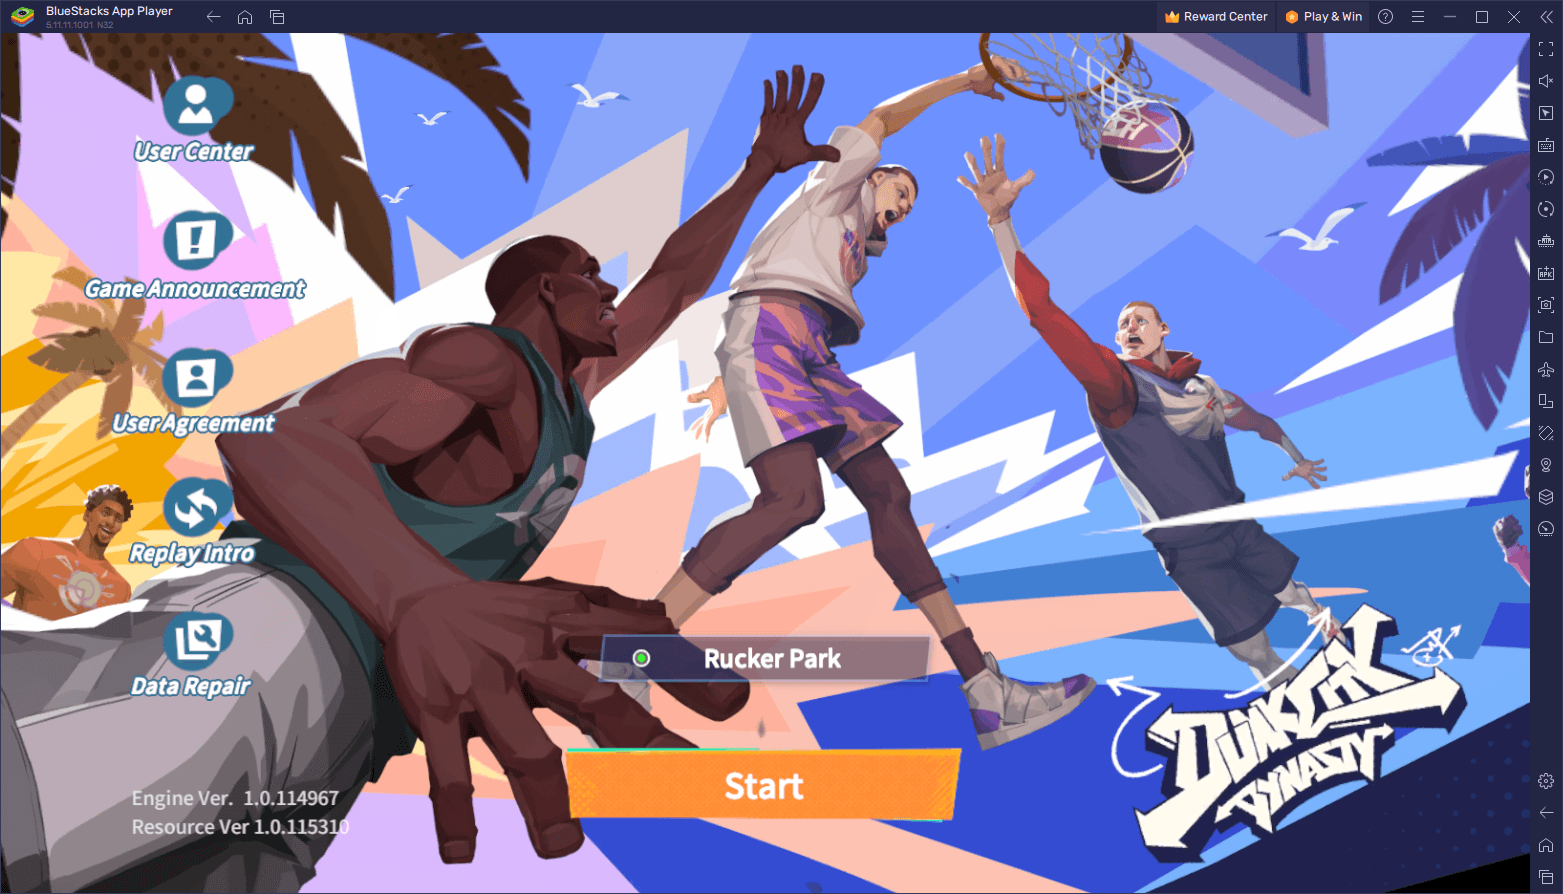 Dunk City Dynasty on PC - How to Enhance Your Gameplay Experience With Our BlueStacks Tools and Features